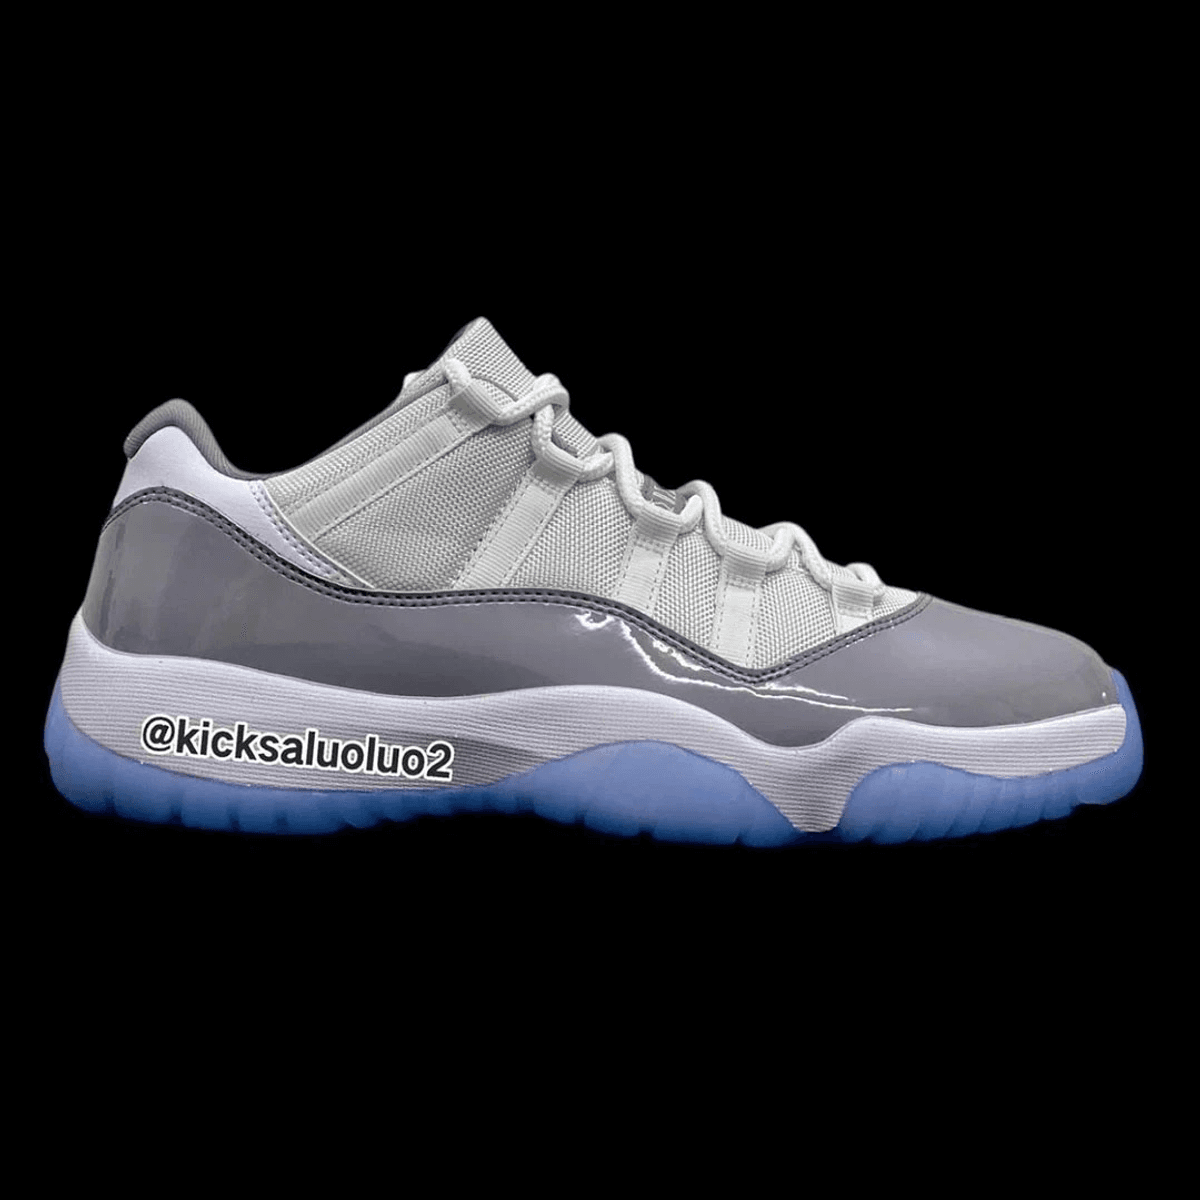 Leaked Images Of The Air Jordan 11 Low Cement Grey